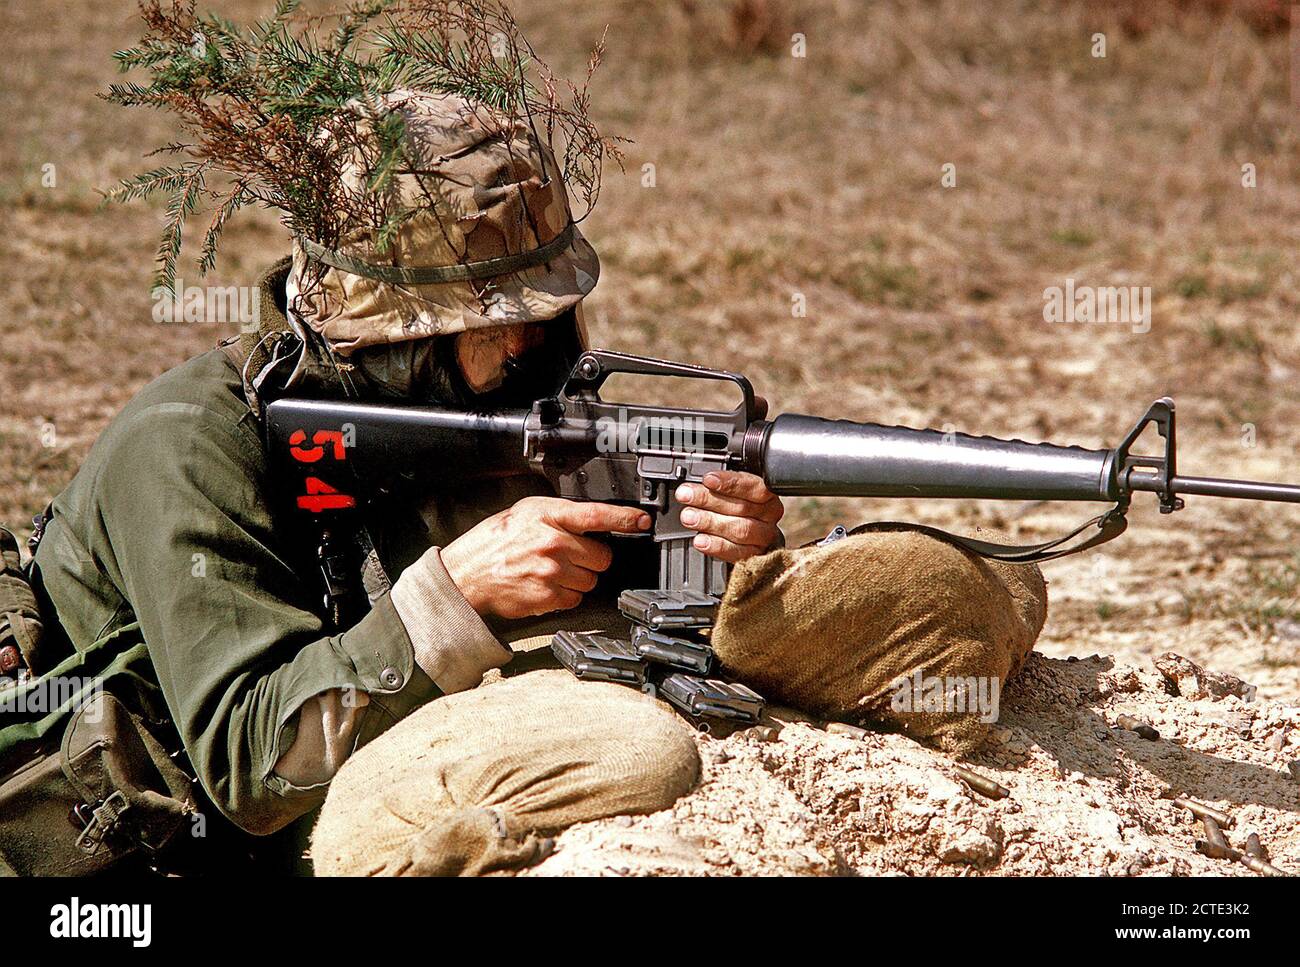 1972 - A U.S. Army soldier fires an M-16A1 rifle during a field exercise.  He is wearing a Nuclear, Biological and Chemical (NBC) protective mask. Stock Photo